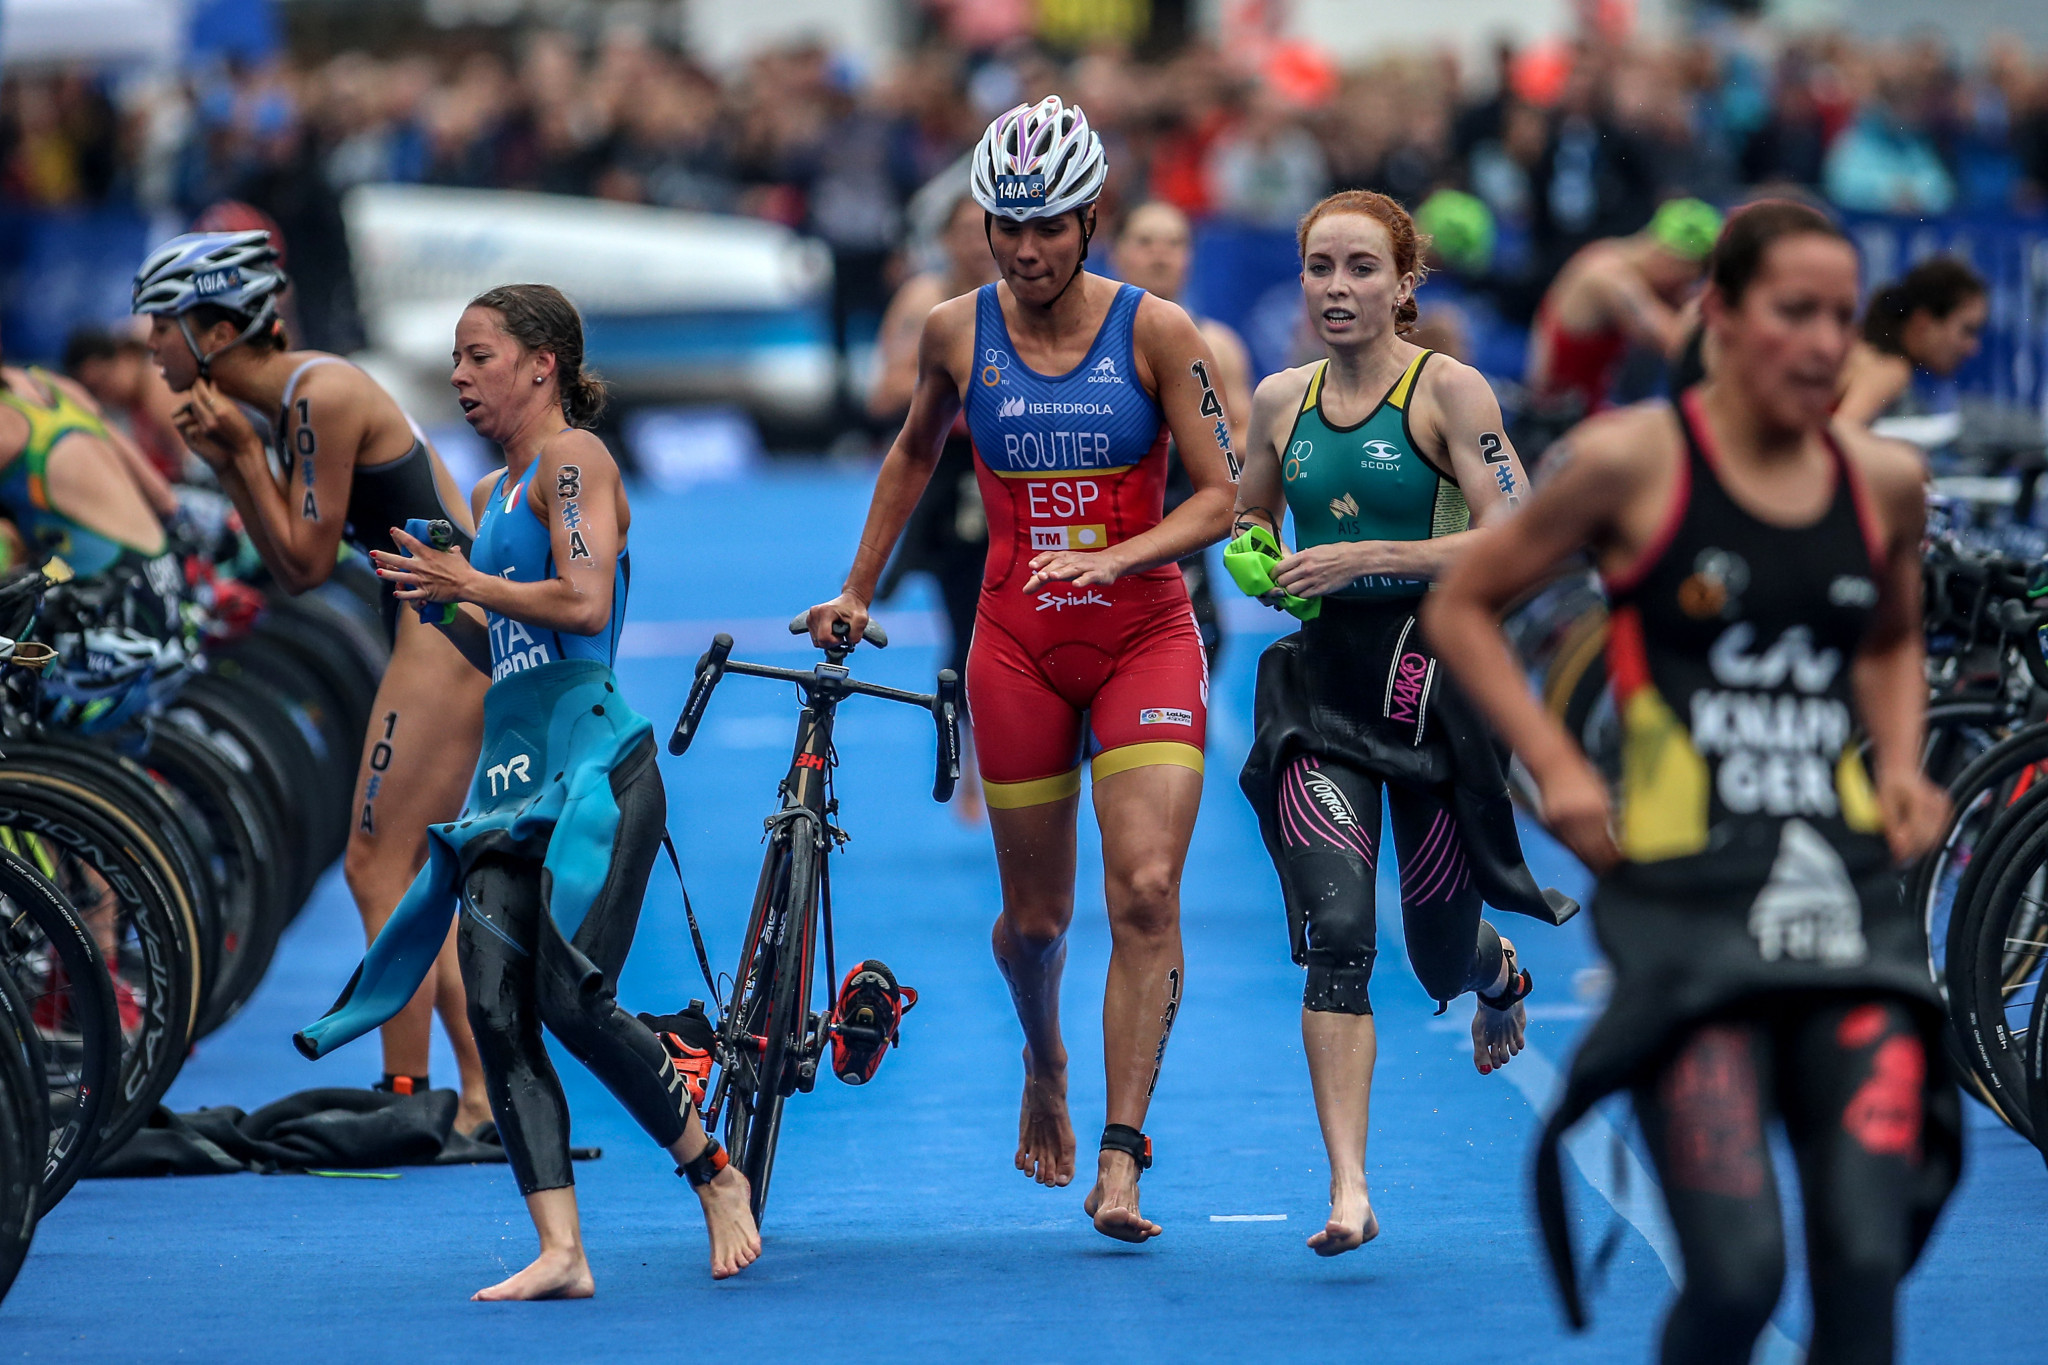 Mixed relay triathlon will debut on the Olympic stage at Tokyo 2020 ©Getty Images